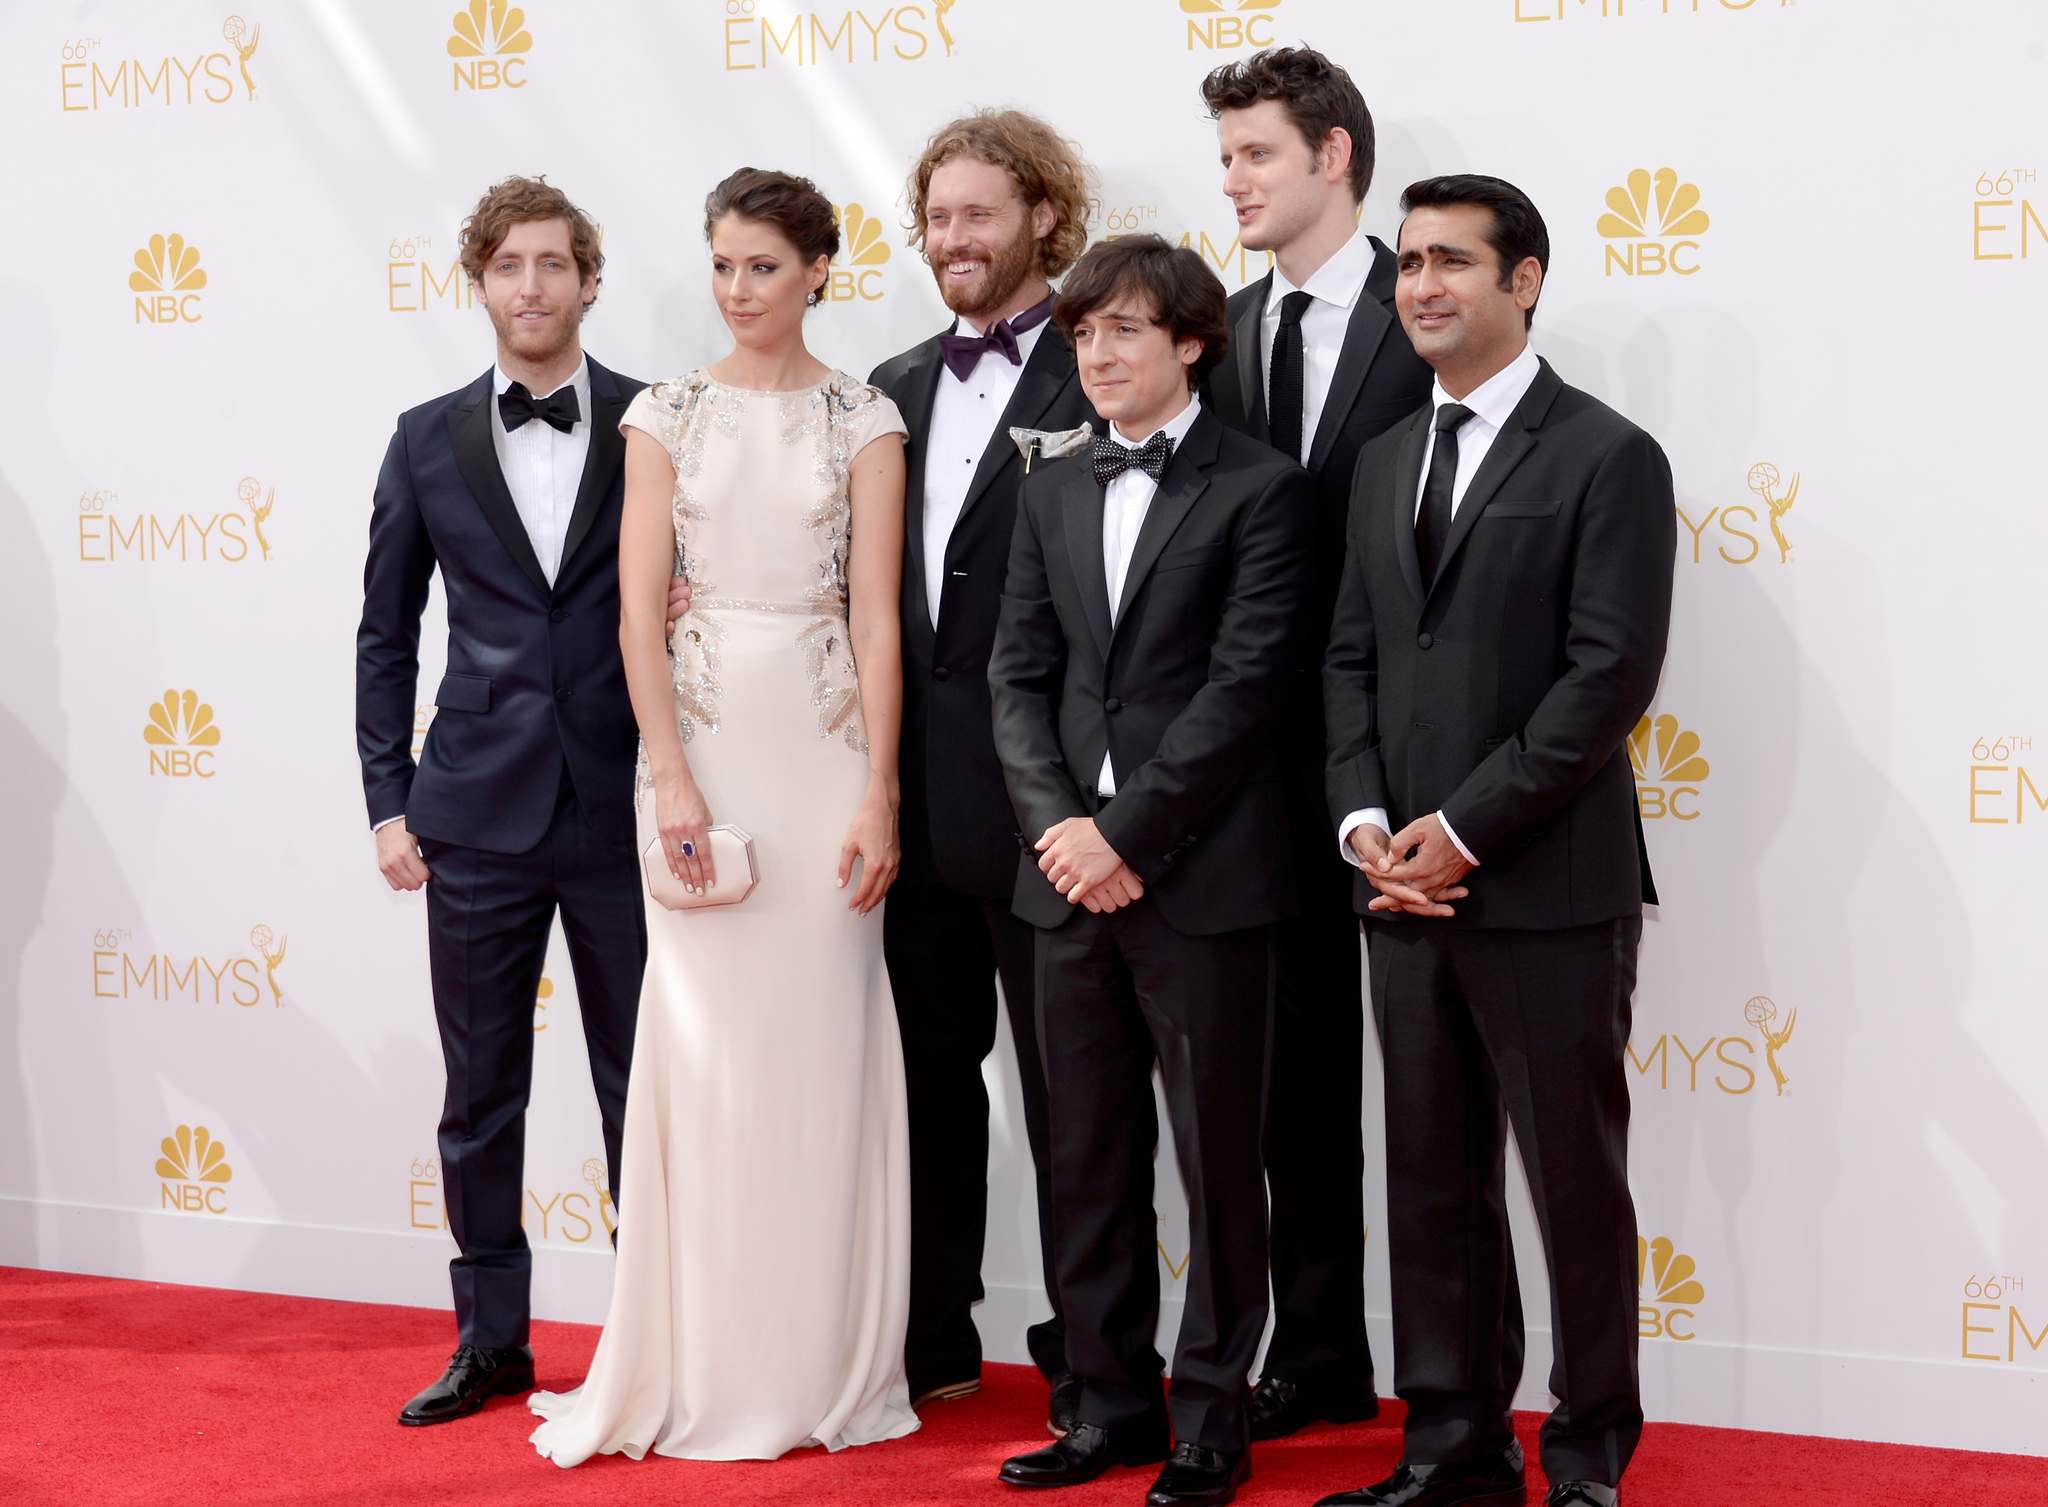 Amanda Crew, Zach Woods, T.J. Miller, Thomas Middleditch, Josh Brener and Kumail Nanjiani at event of The 66th Primetime Emmy Awards (2014)